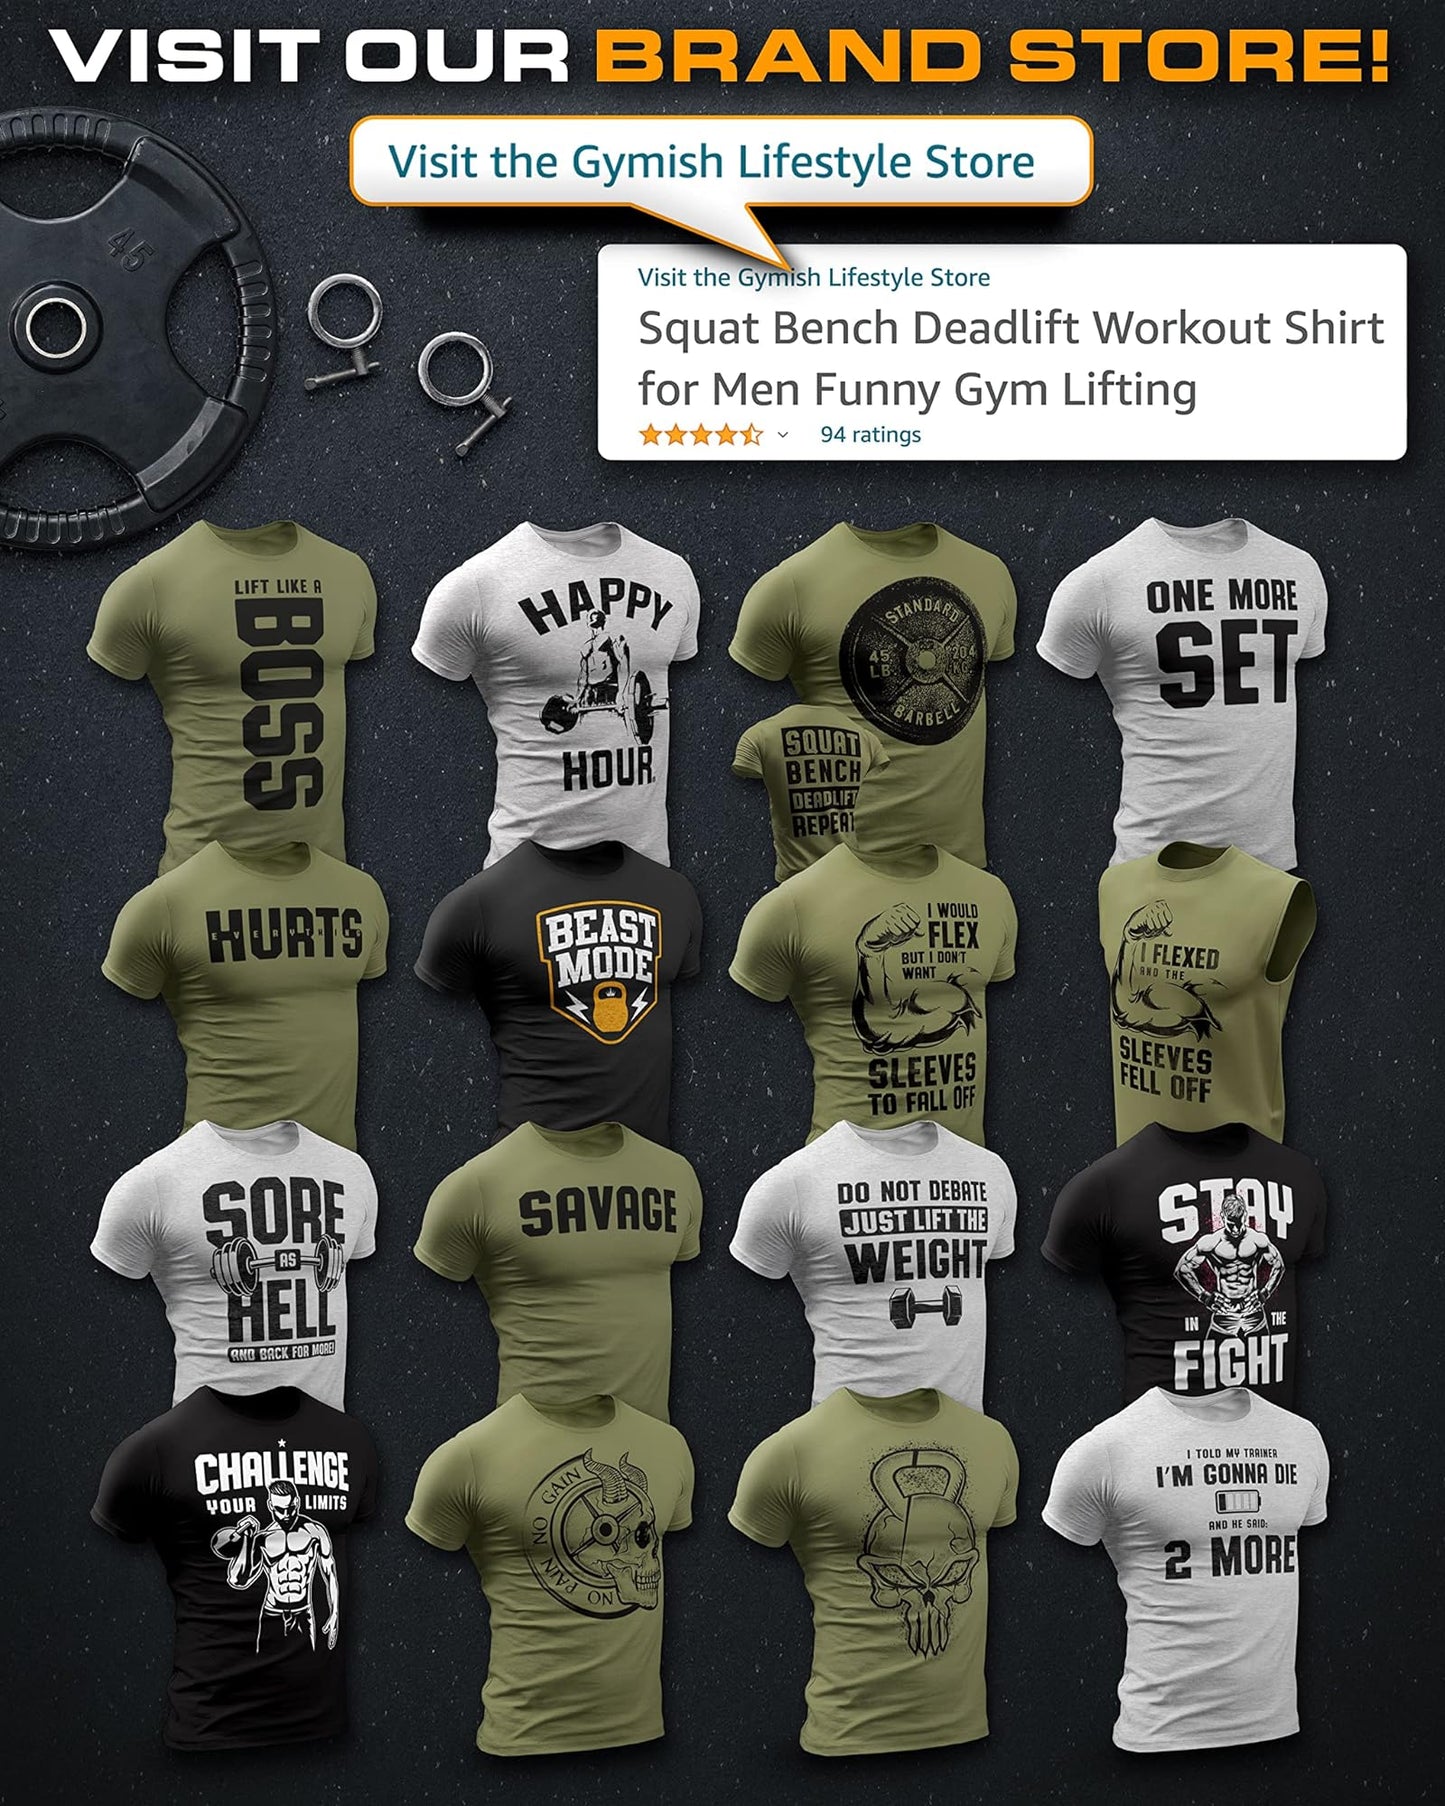 053. DOUBLE YOUR GAINS Workout T-Shirt